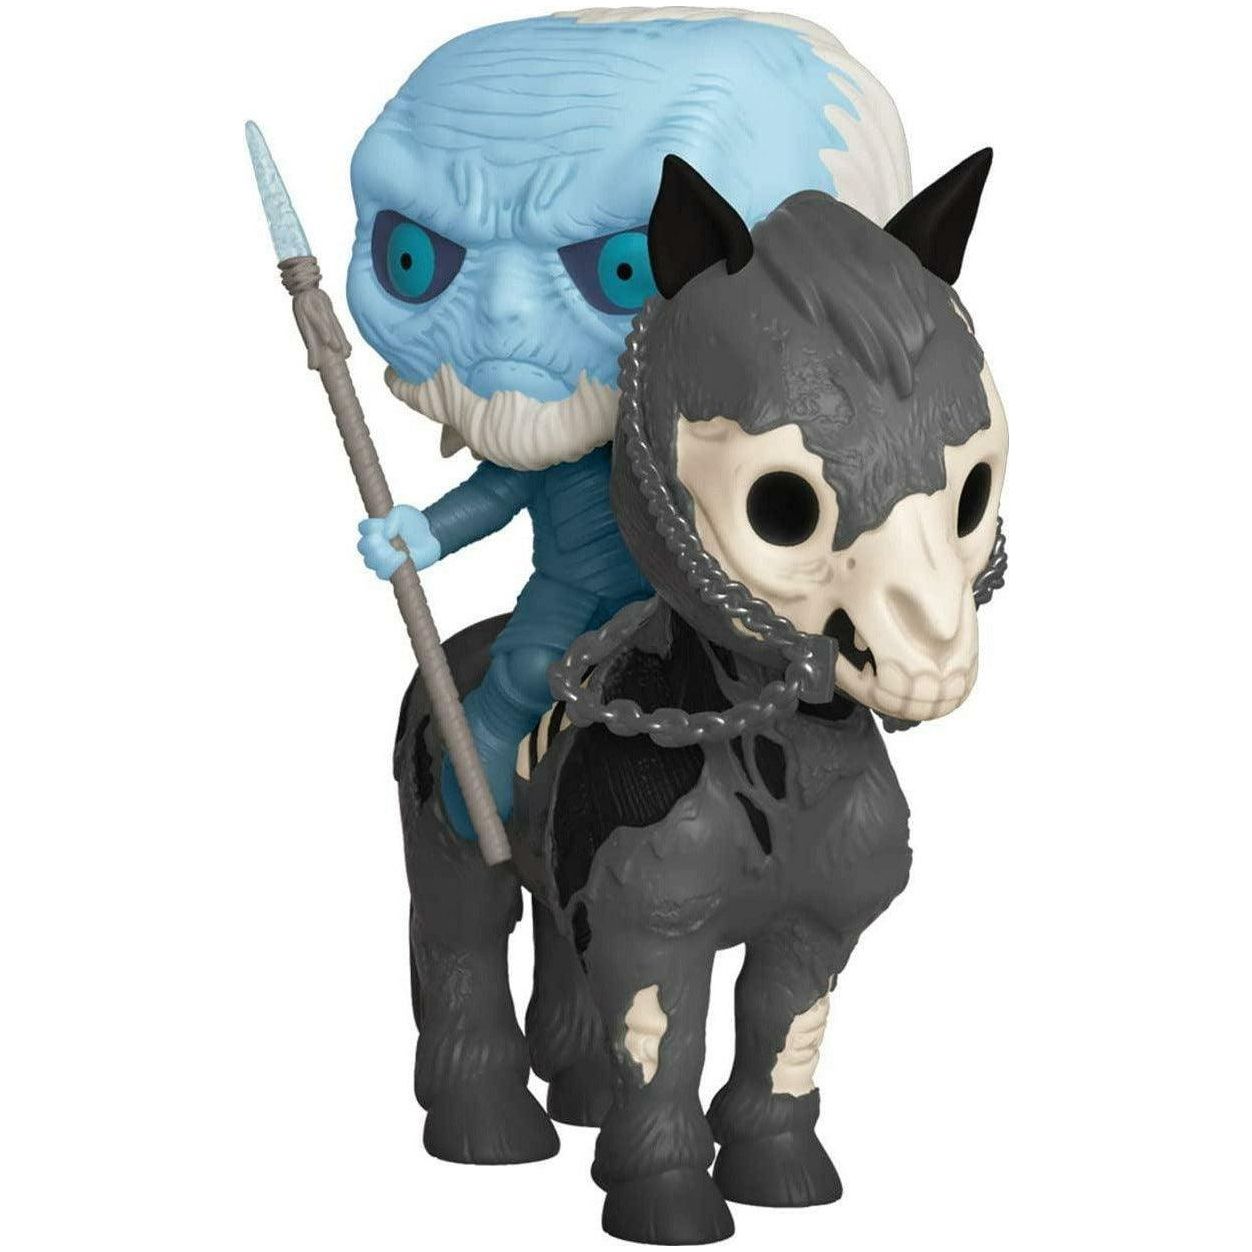 Funko Pop! Rides: Game of Thrones – Glow in The Dark White Walker and Horse - BumbleToys - 18+, 5-7 Years, 6+ Years, Boys, Dolls, Funko, Game of Thrones, OXE, Pre-Order